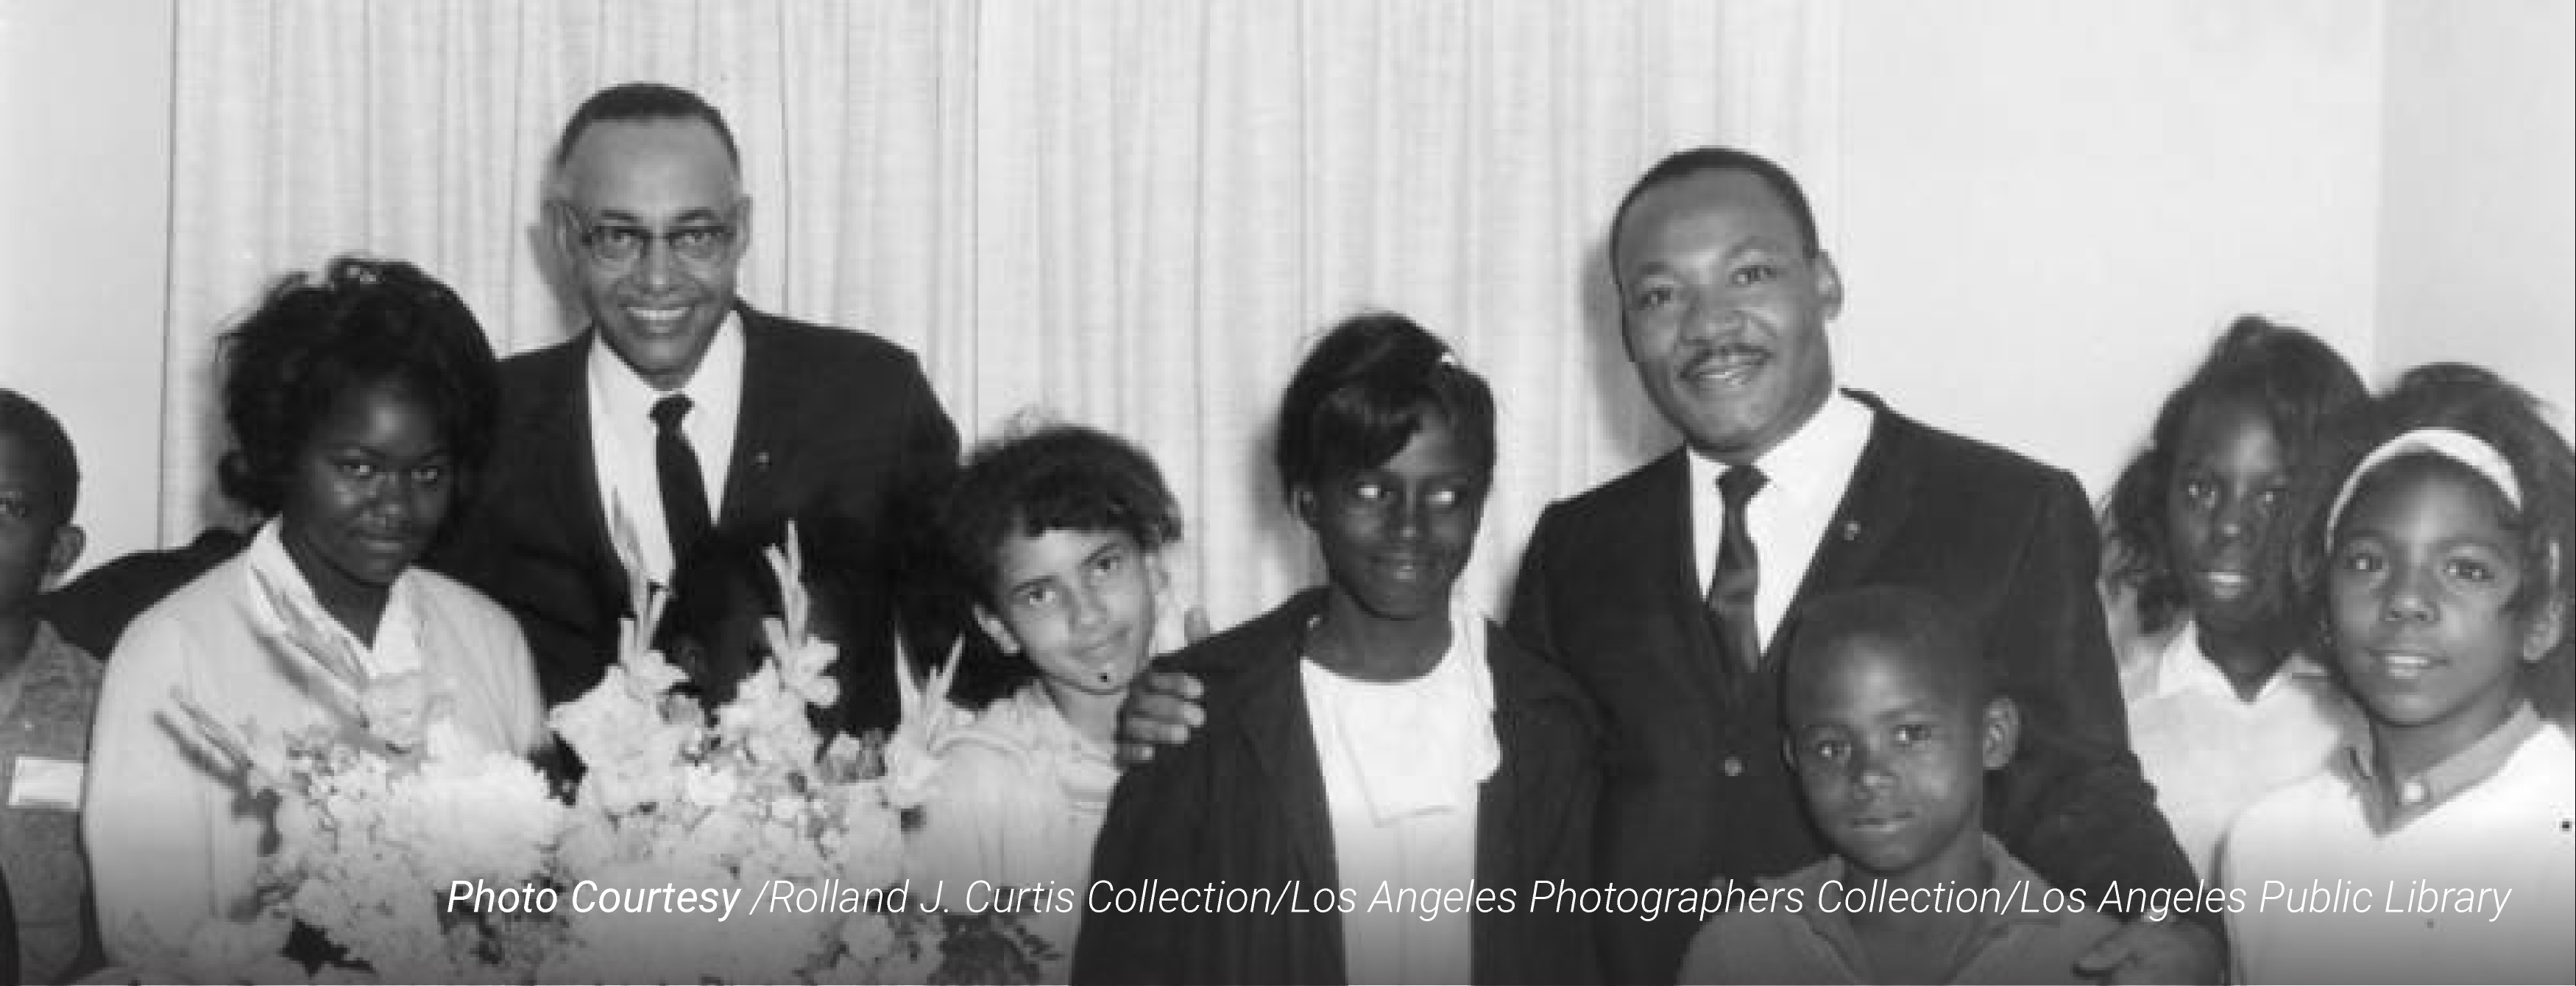 Martin Luther King Jr. with Reverend Thomas Kilgore of Second Baptist Church in Los Angeles in February 1964.